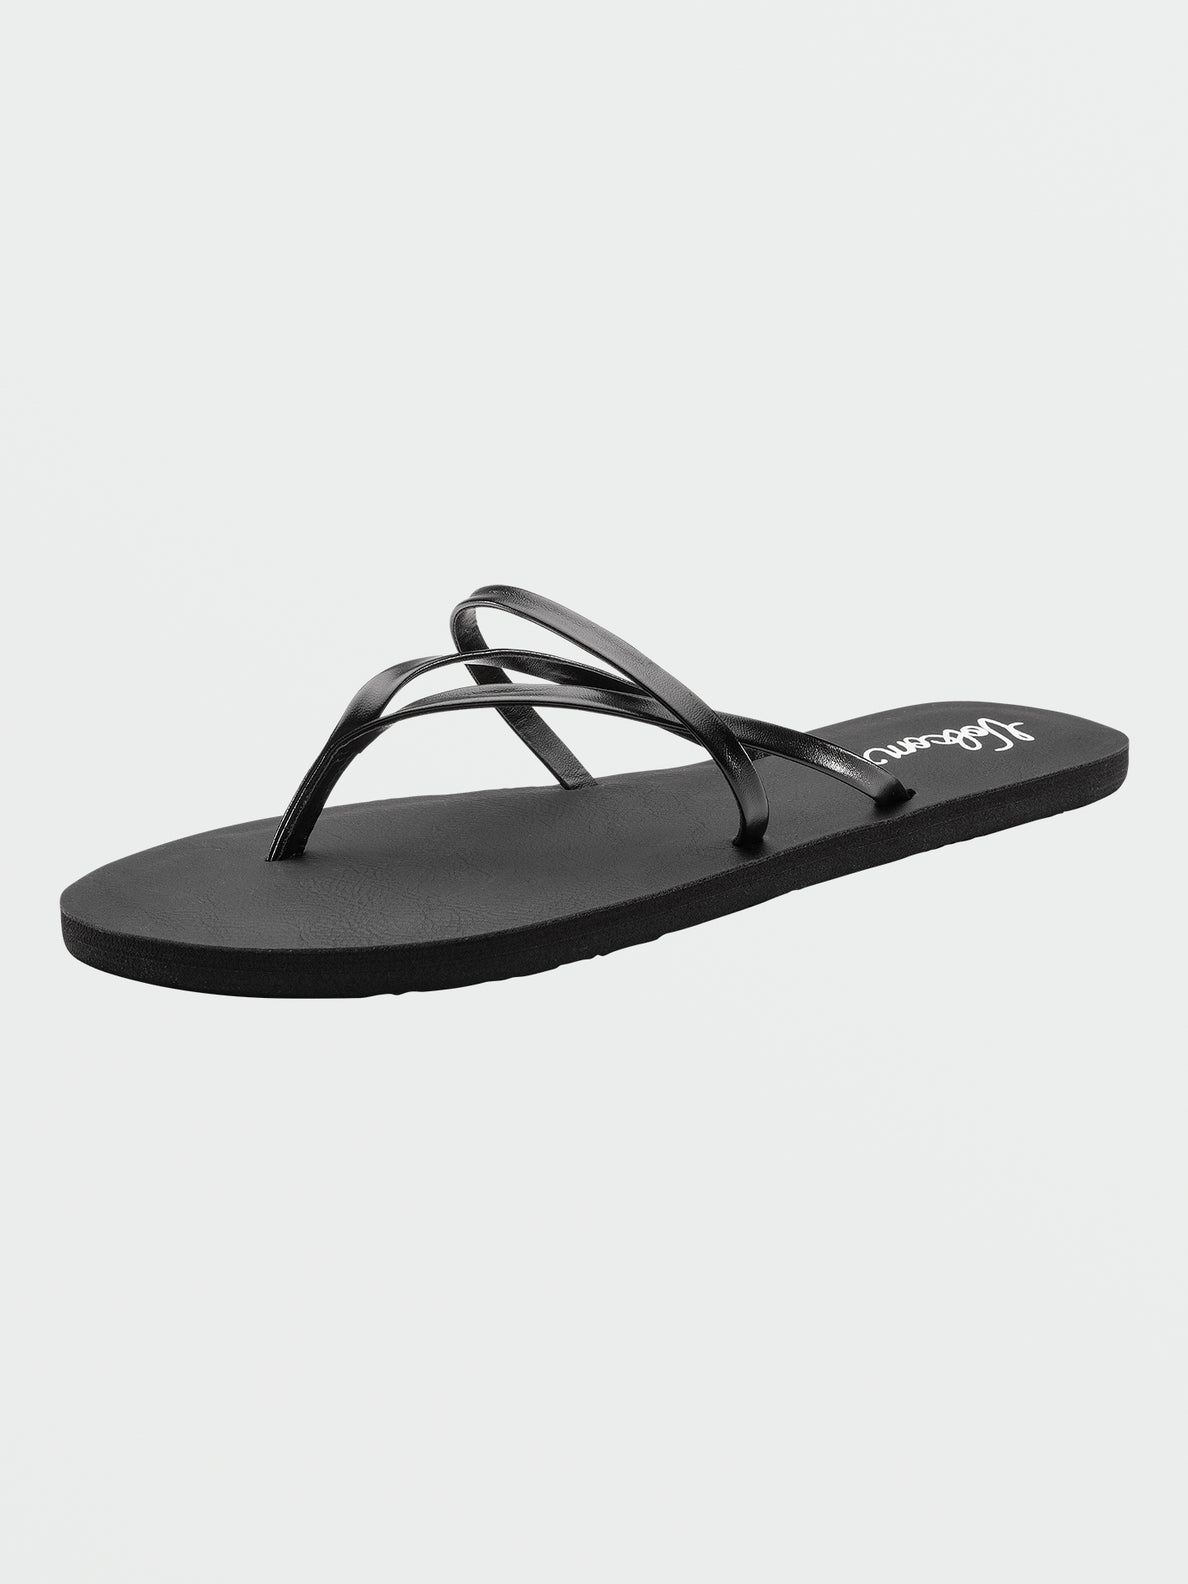 All Day Long Sandal - Black Out